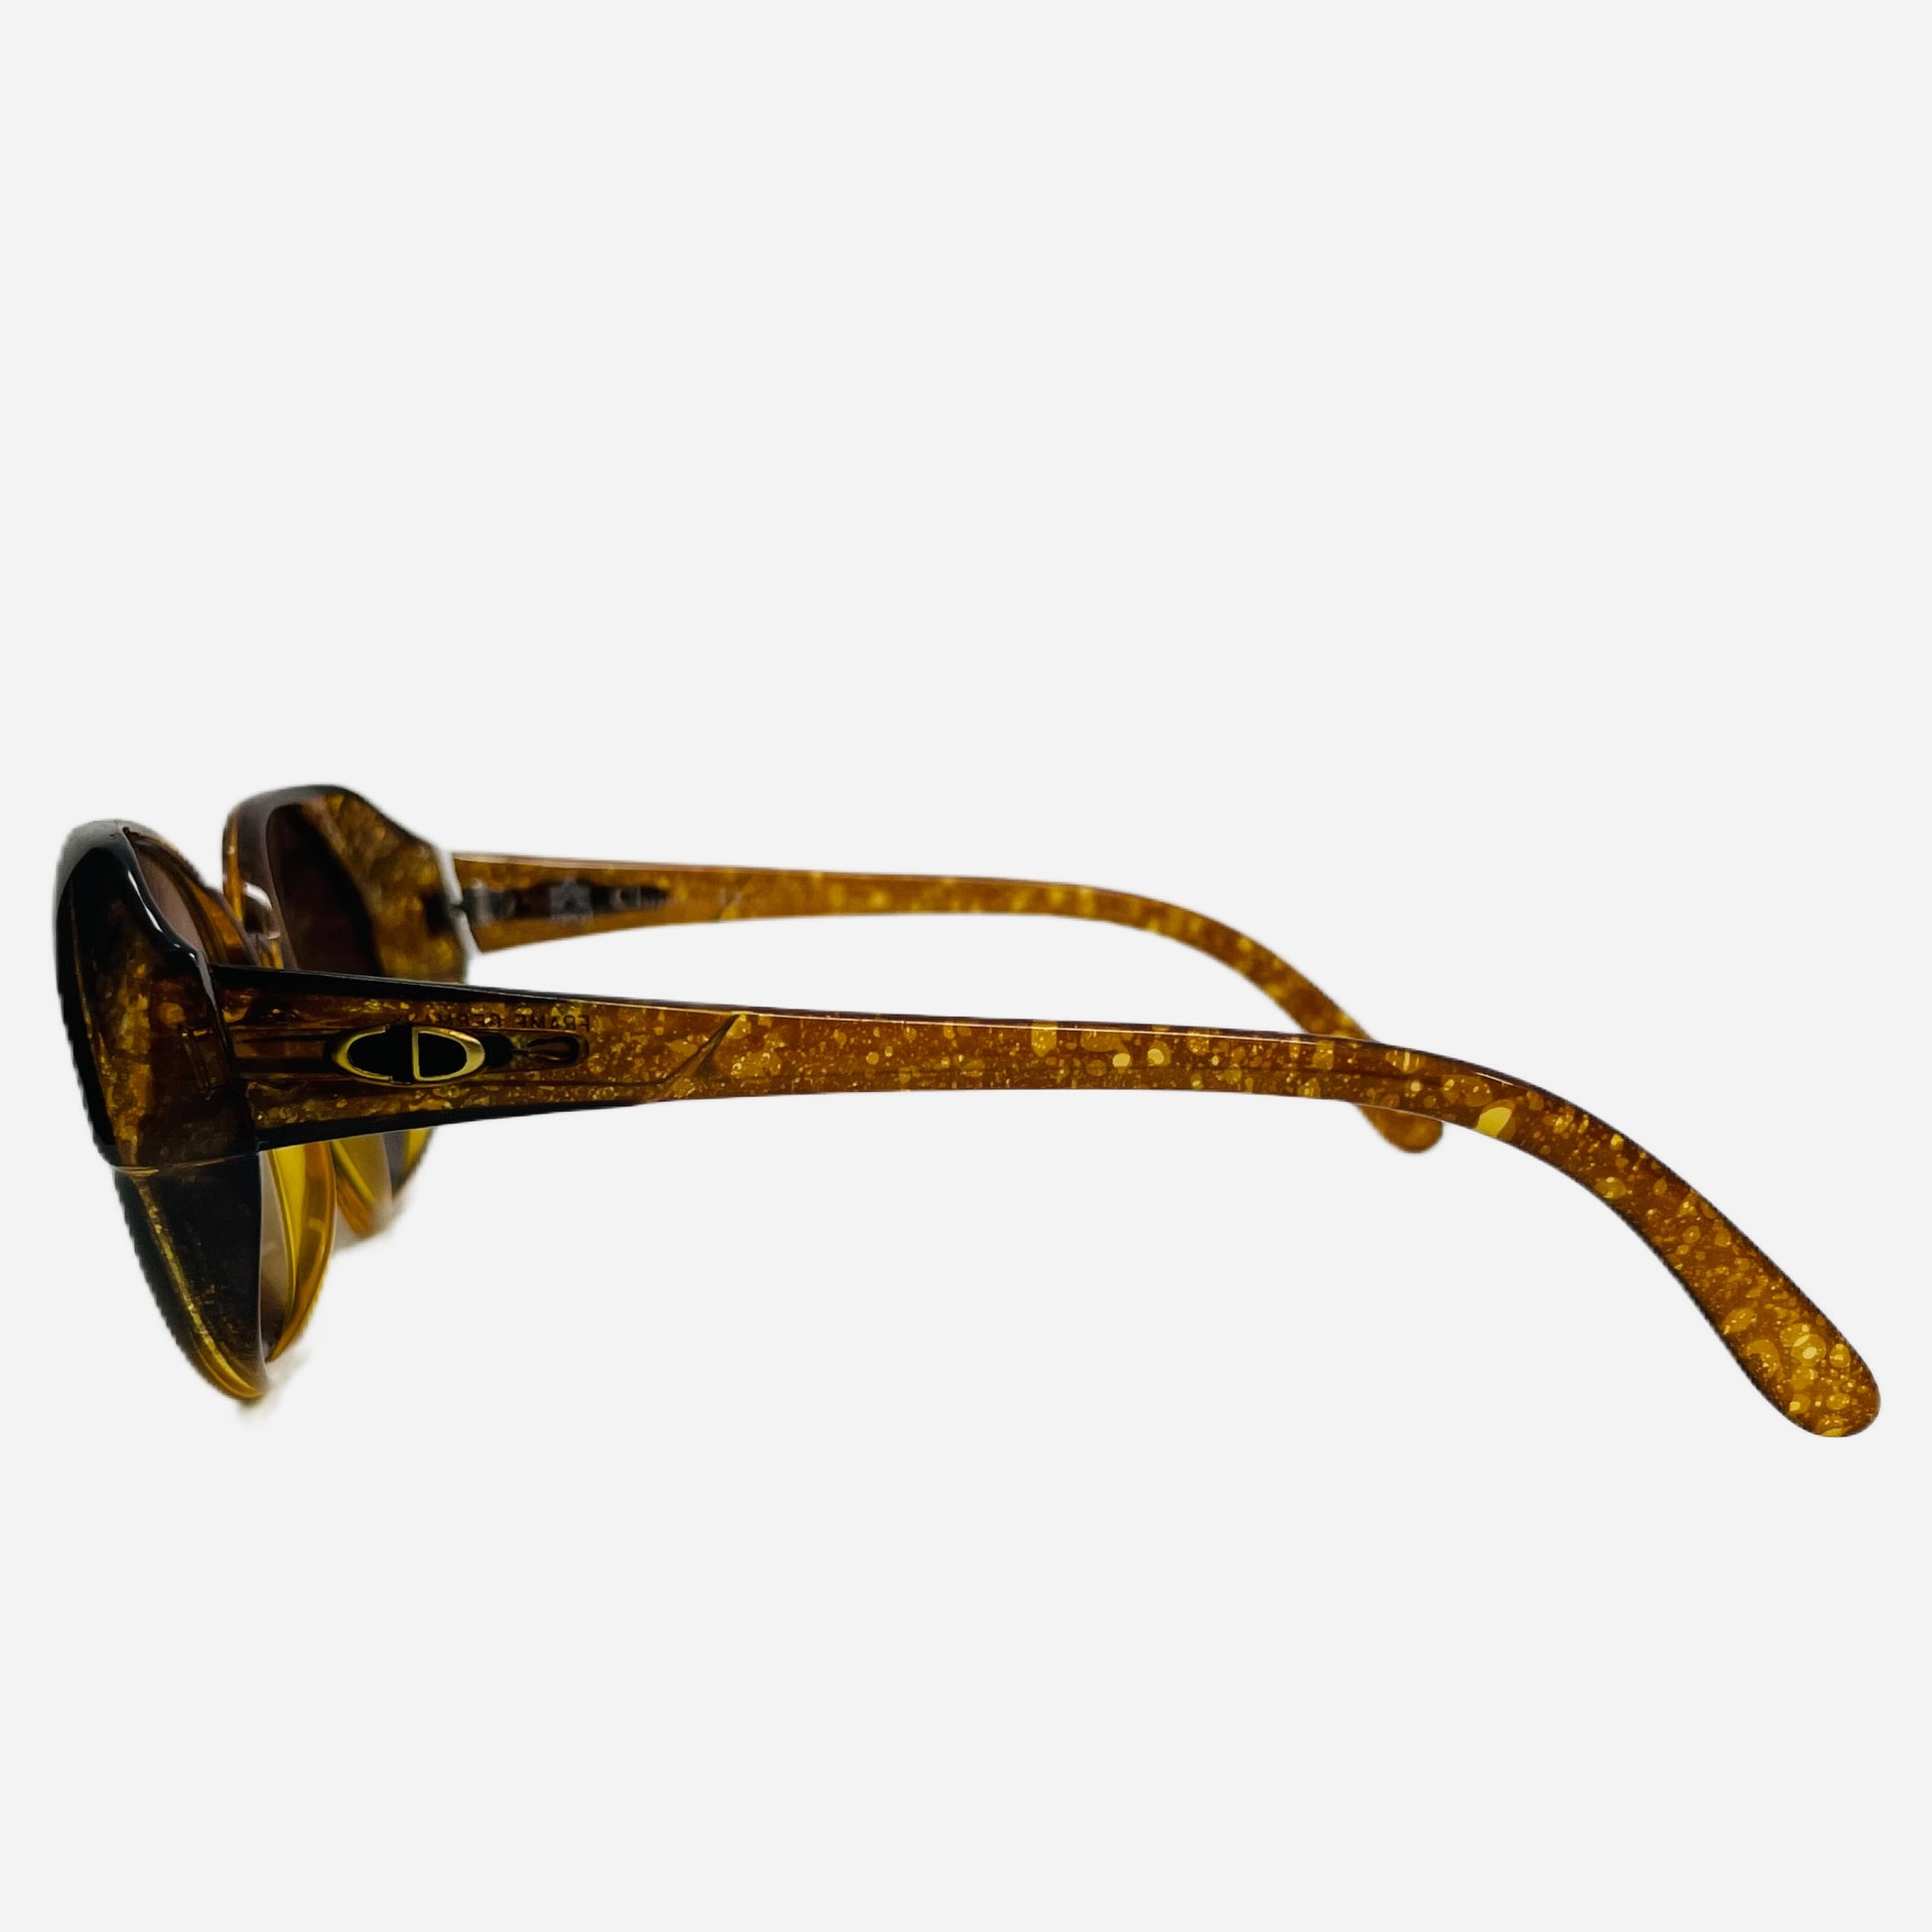 Vintage-Christian-Dior-Sonnenbrille-Sonnenbrille-2019-Optyl-the-seekers-side